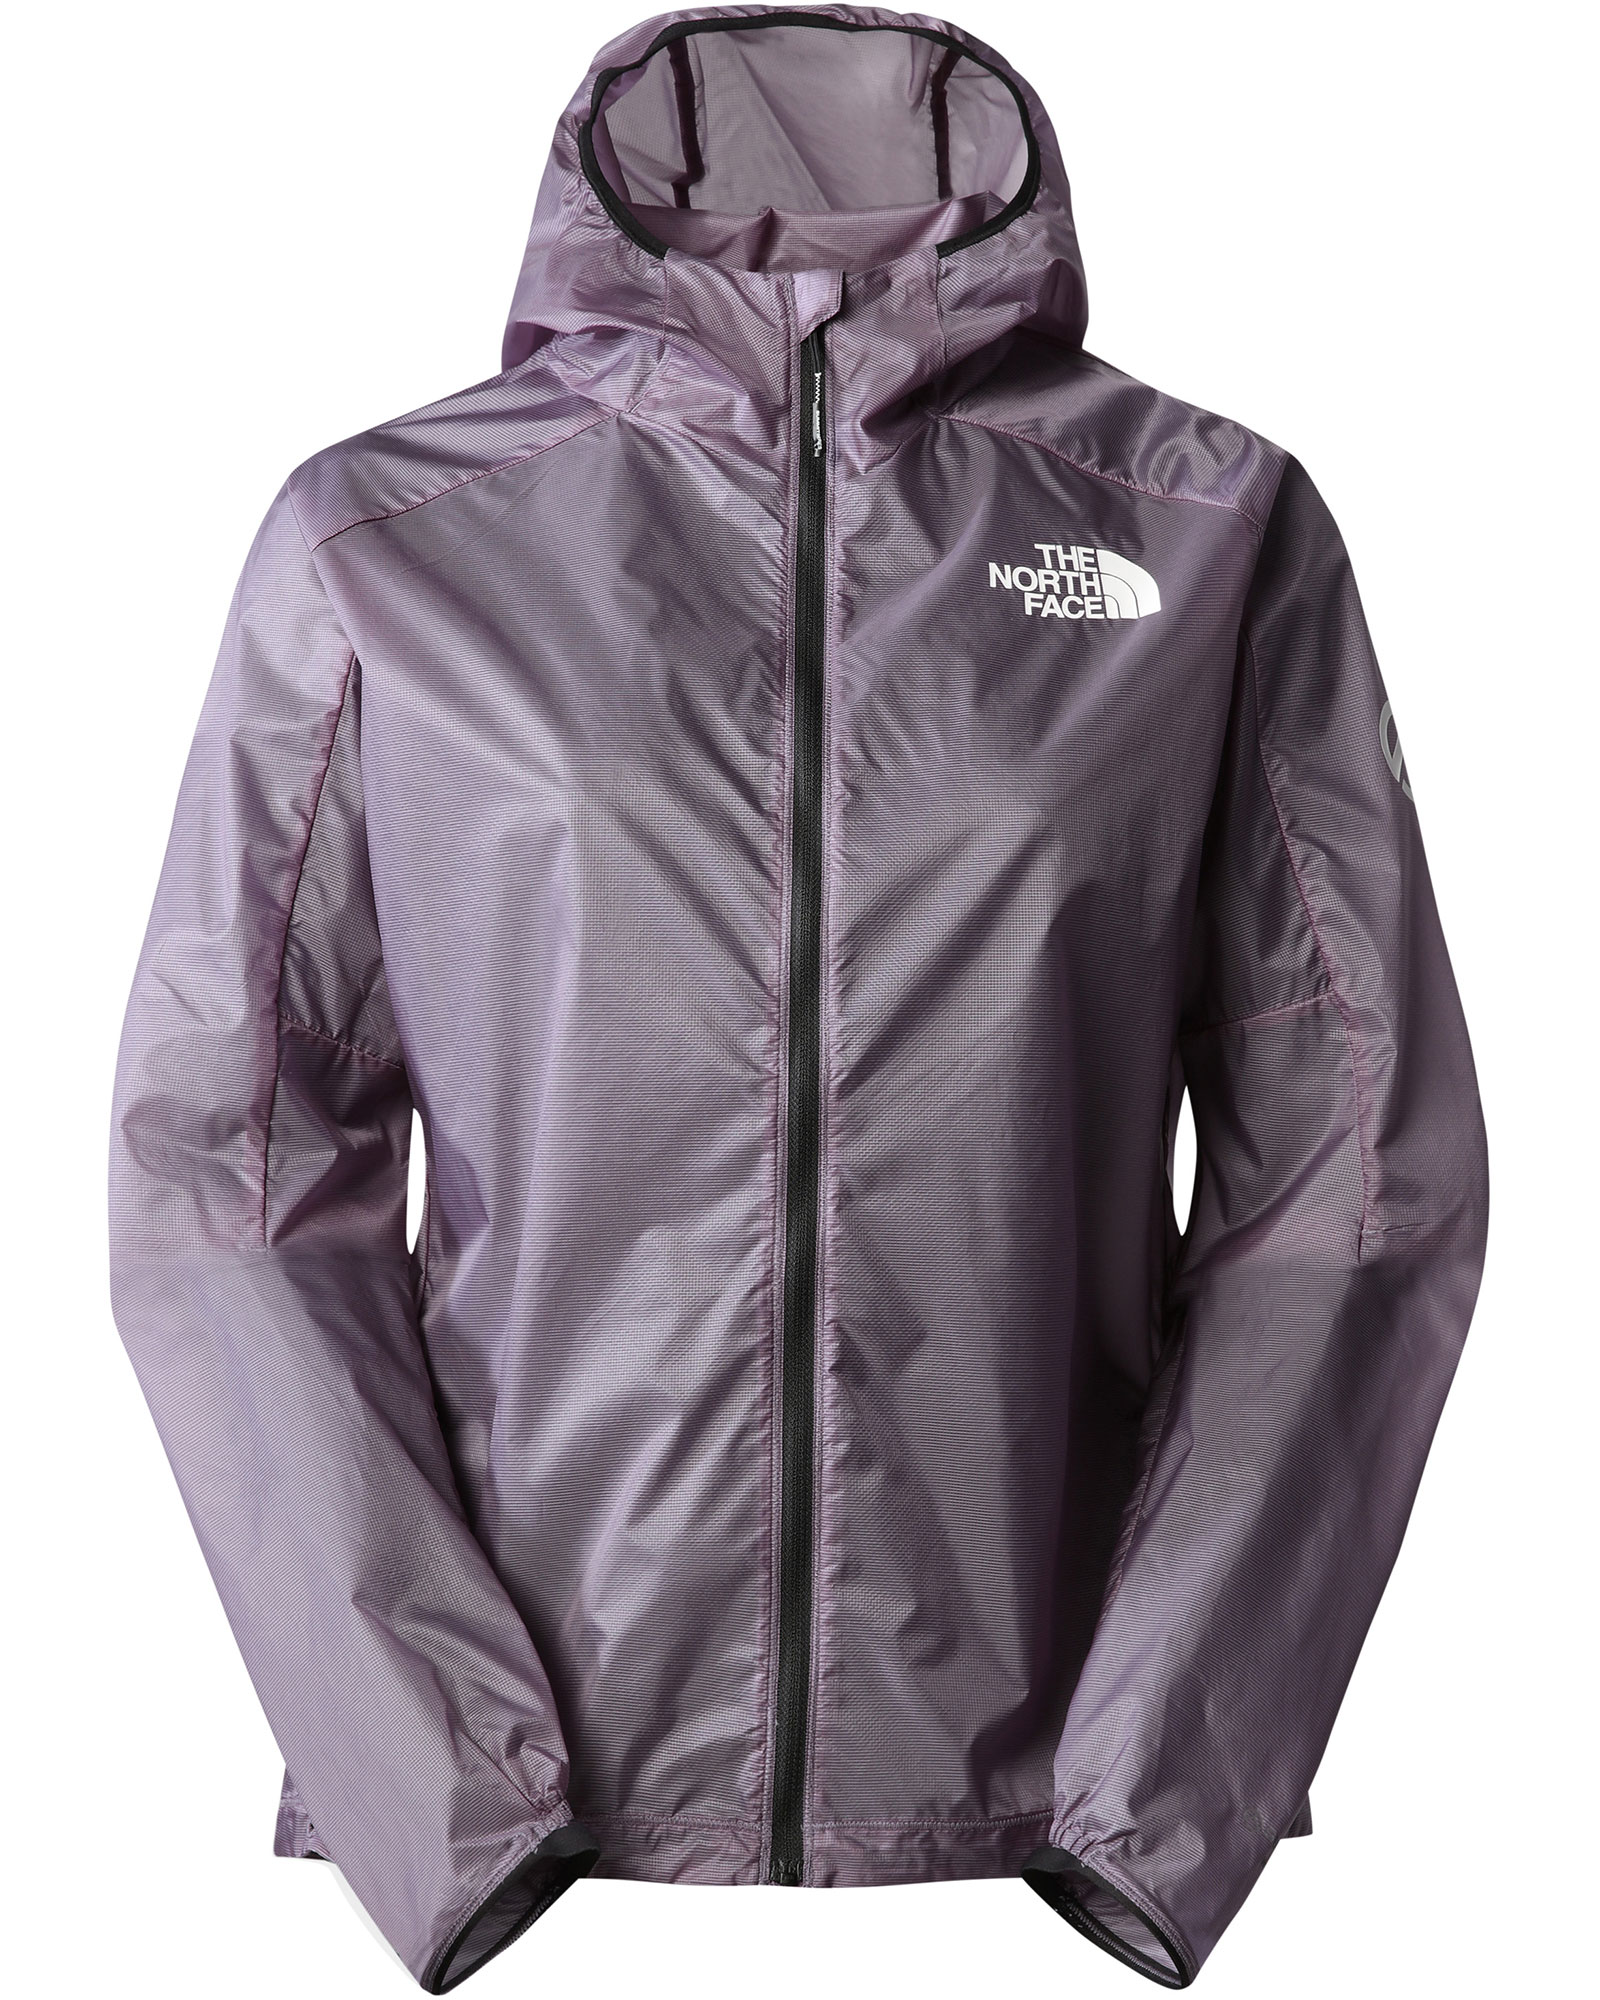 The North Face Women's Summit Superior Wind Jacket 0